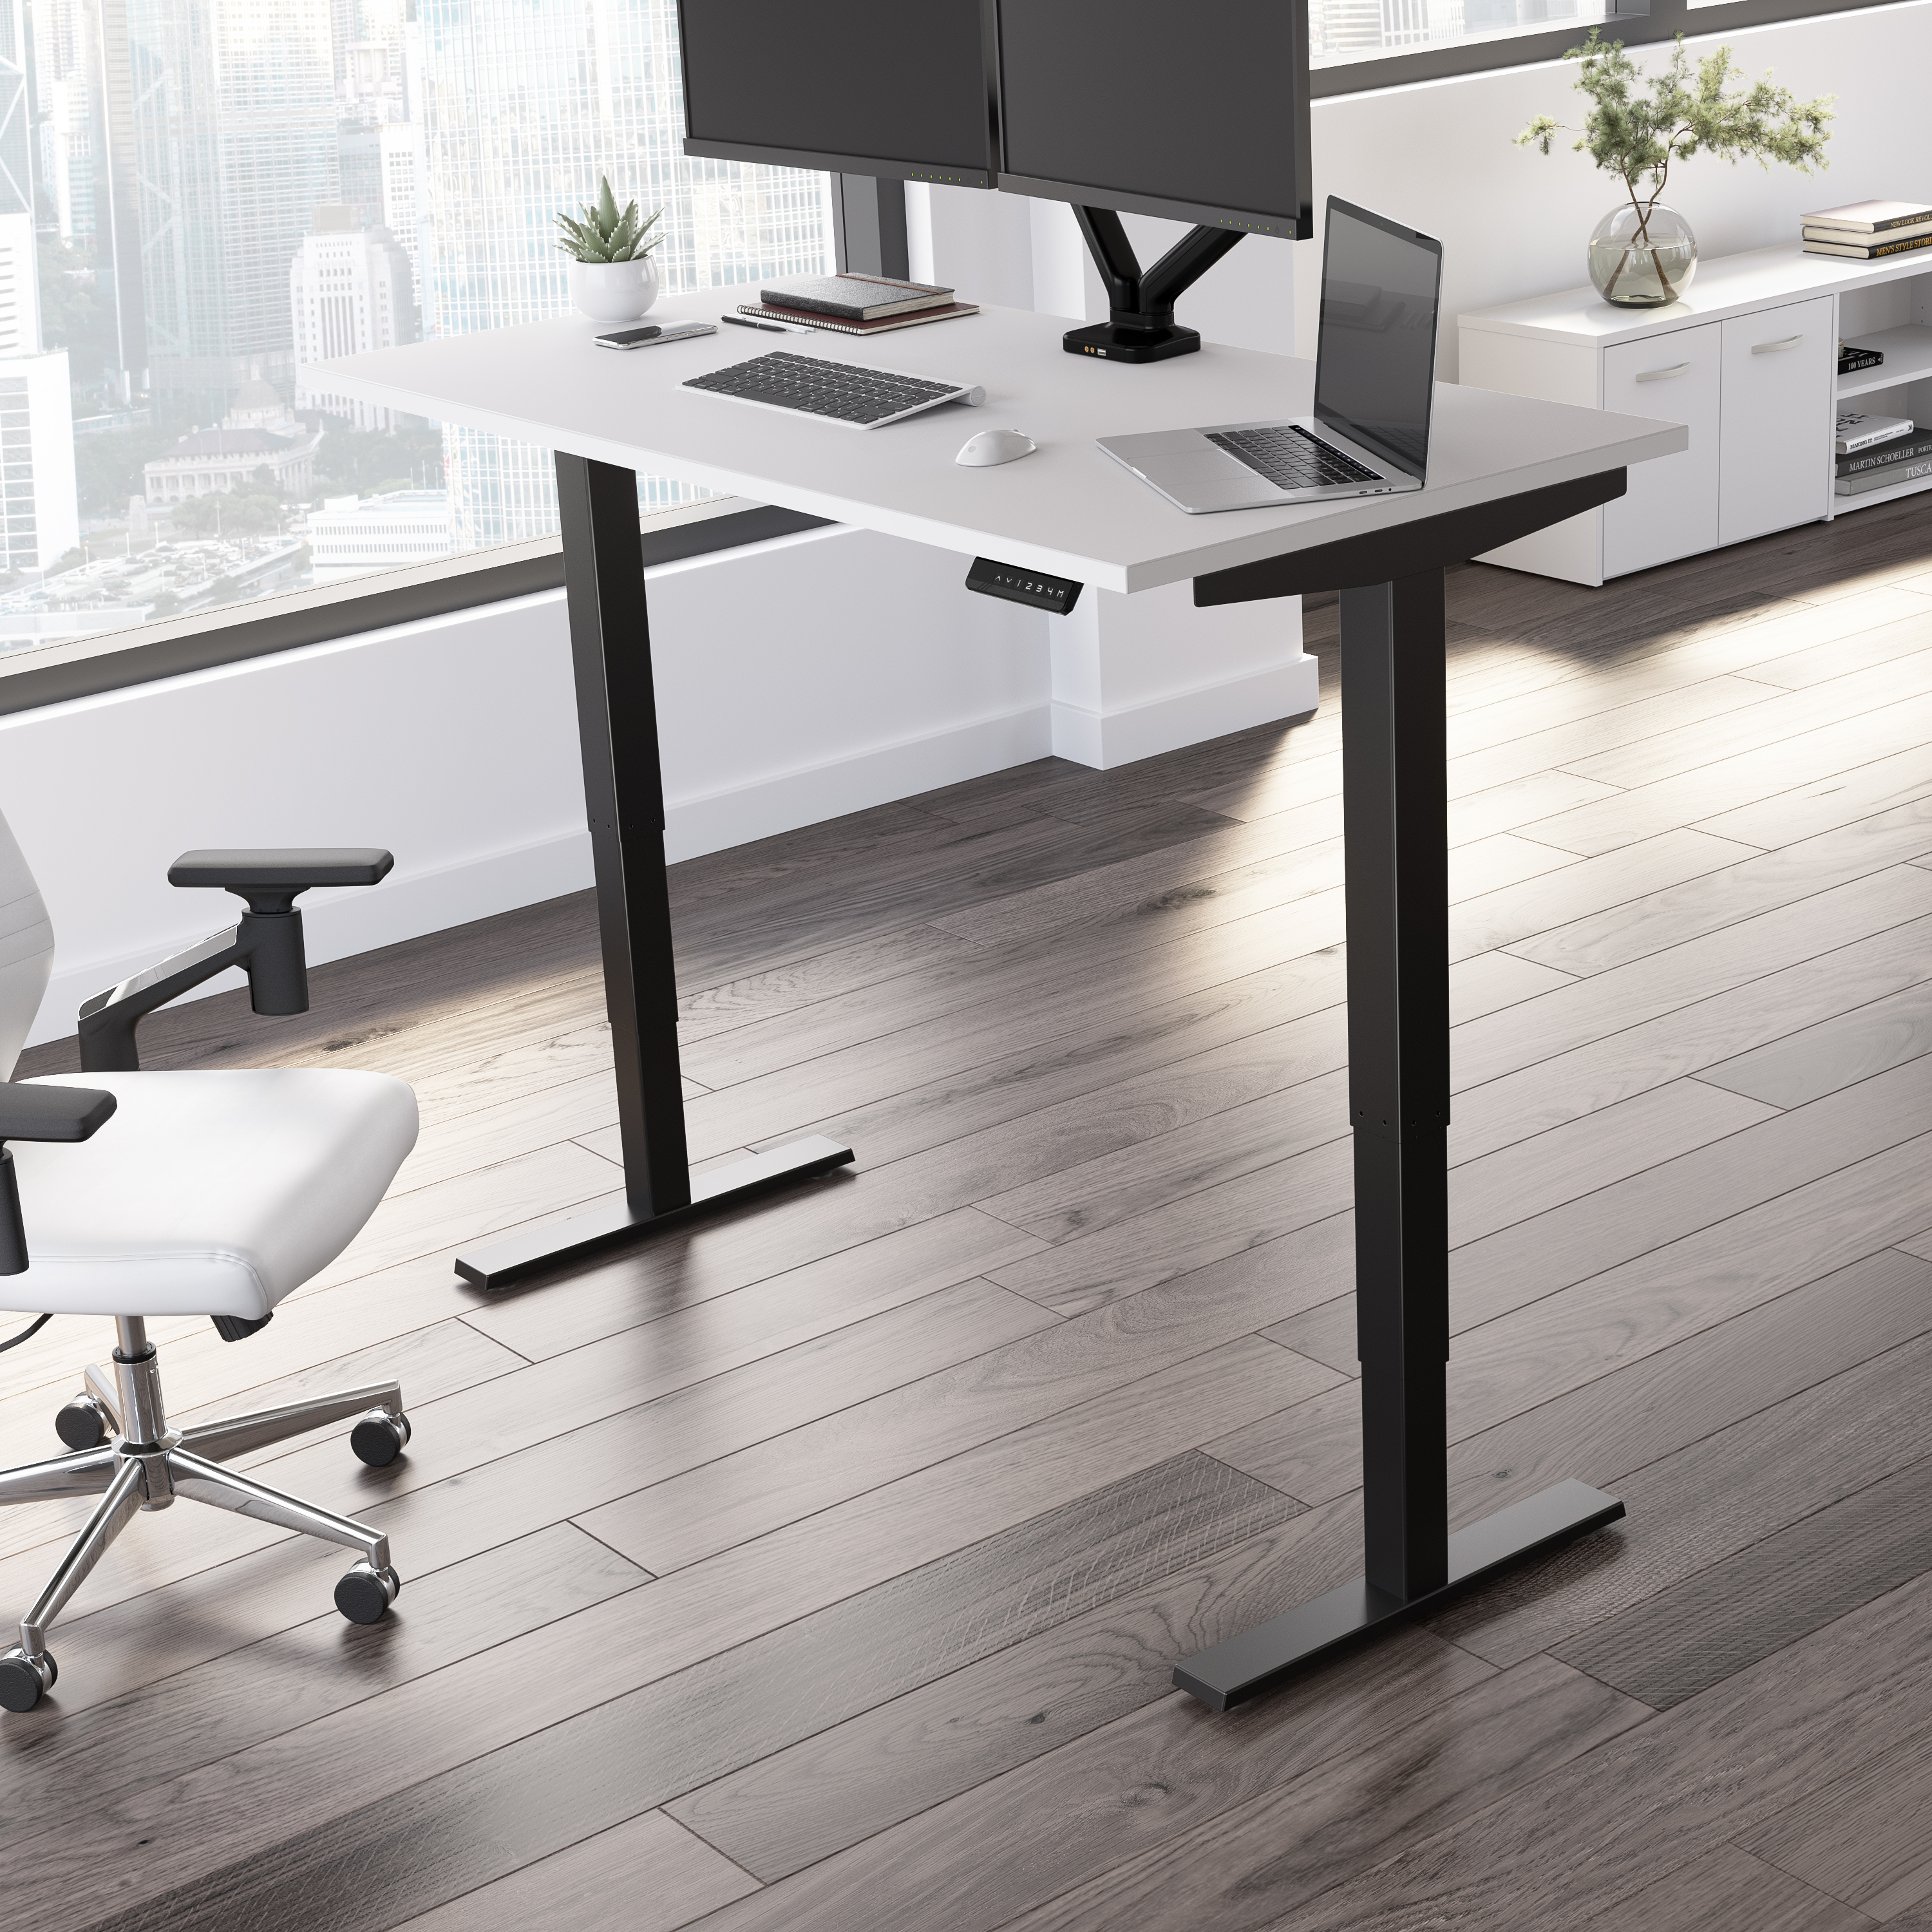 Shop Move 40 Series by Bush Business Furniture 60W x 30D Electric Height Adjustable Standing Desk 01 M4S6030WHBK #color_white/black powder coat